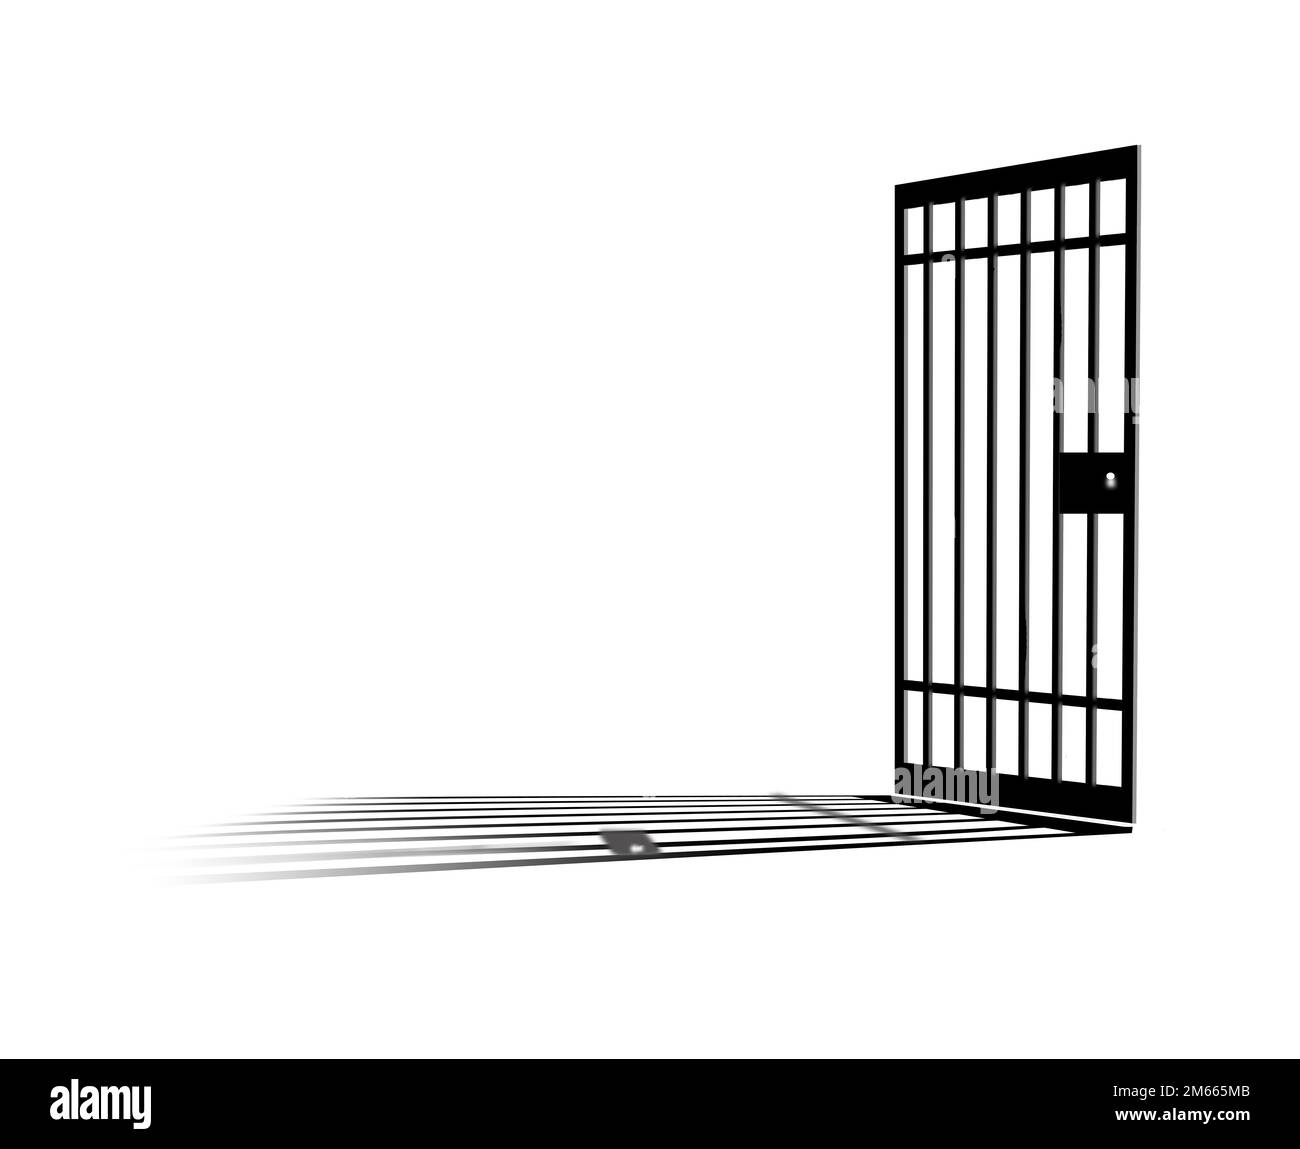 Jail cell Cut Out Stock Images & Pictures - Alamy